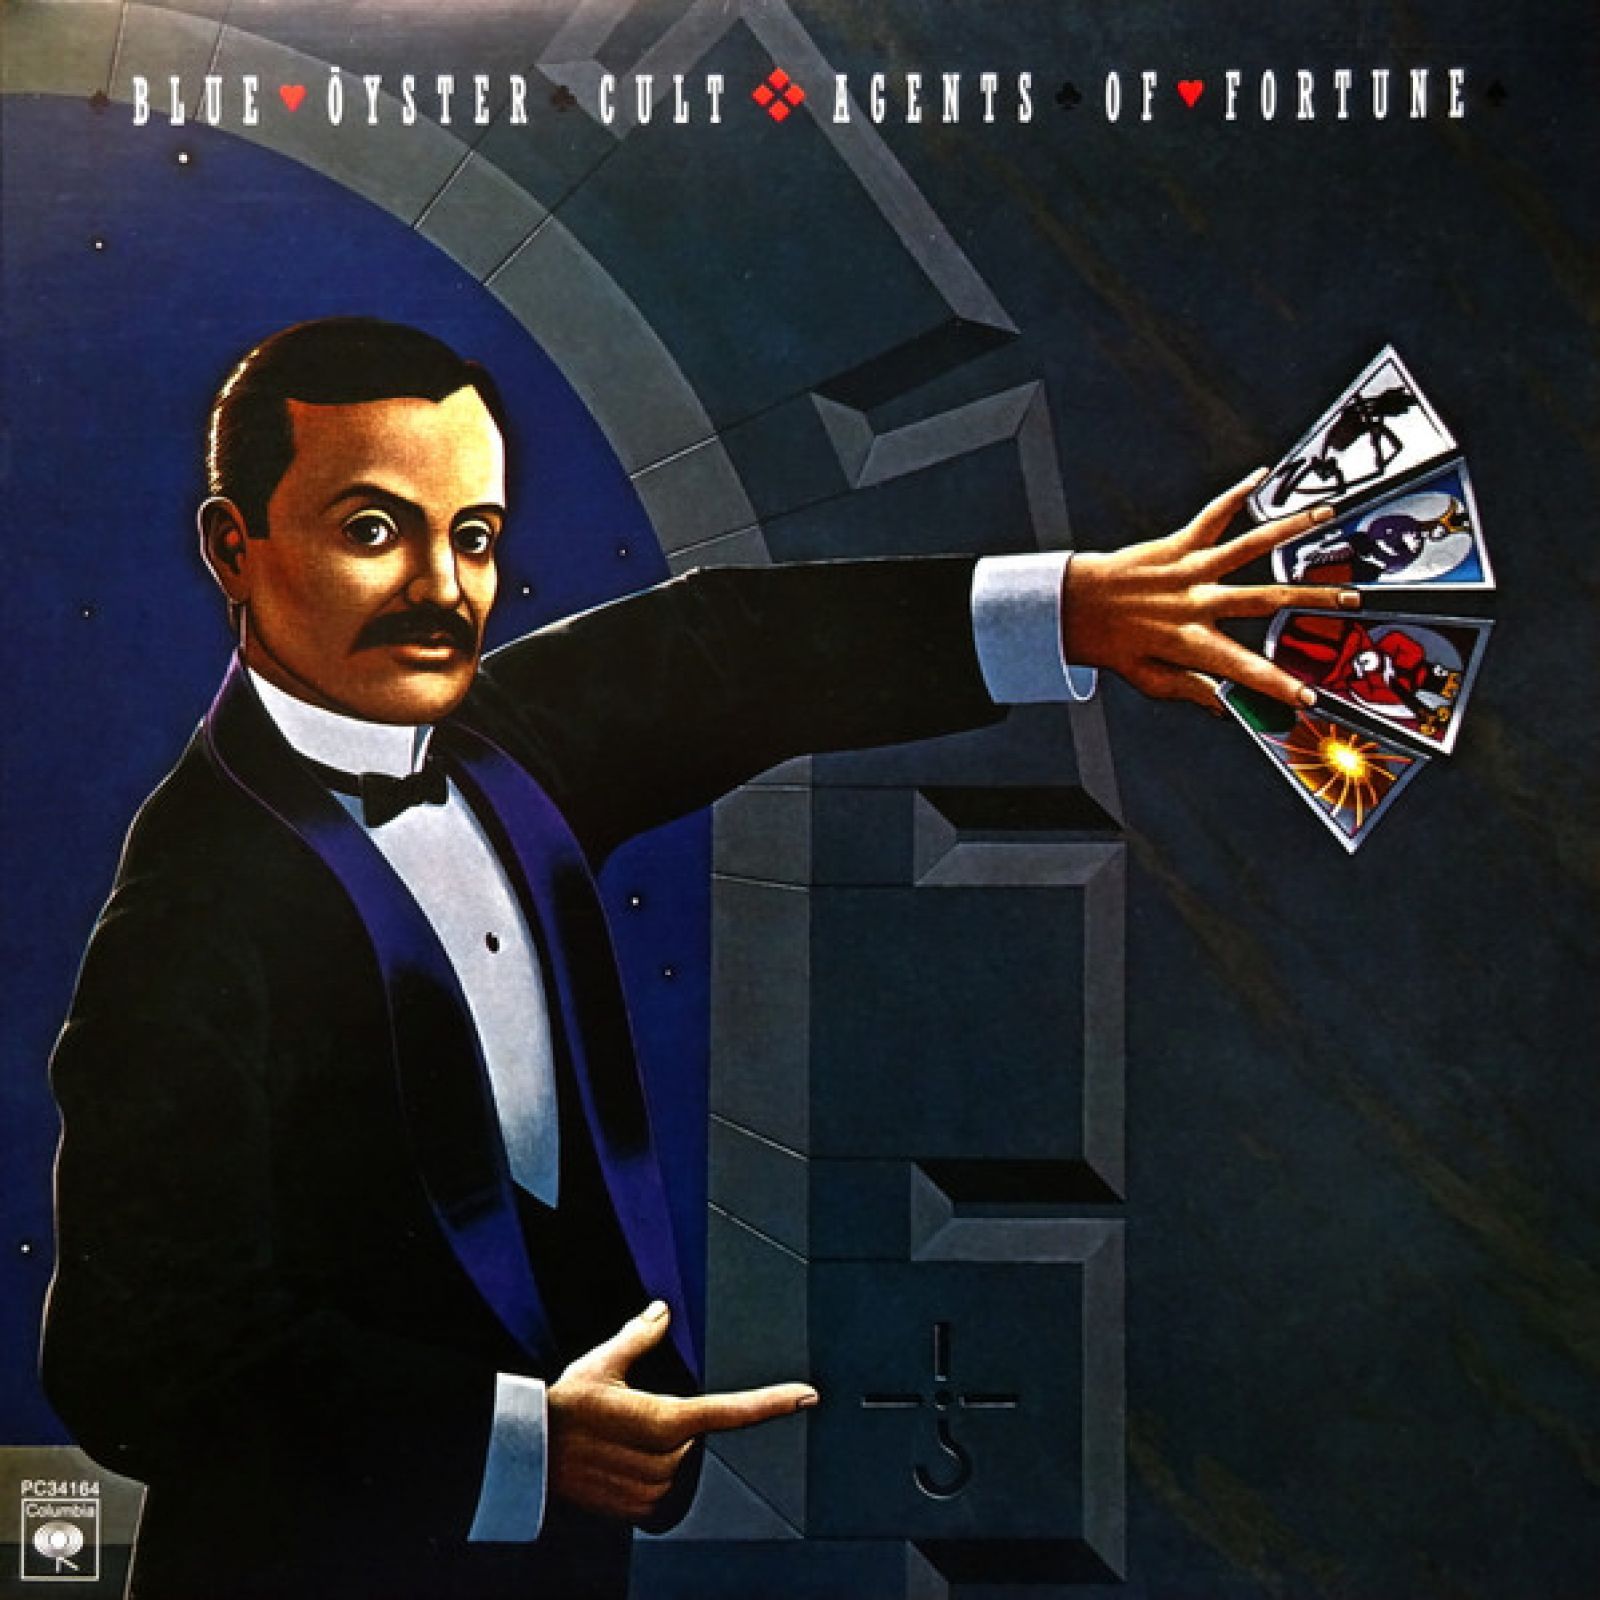 blue oyster cult виниловая пластинка blue oyster cult some enchanted evening Виниловая пластинка Blue Oyster Cult, Agents Of Fortune (8718469535170)